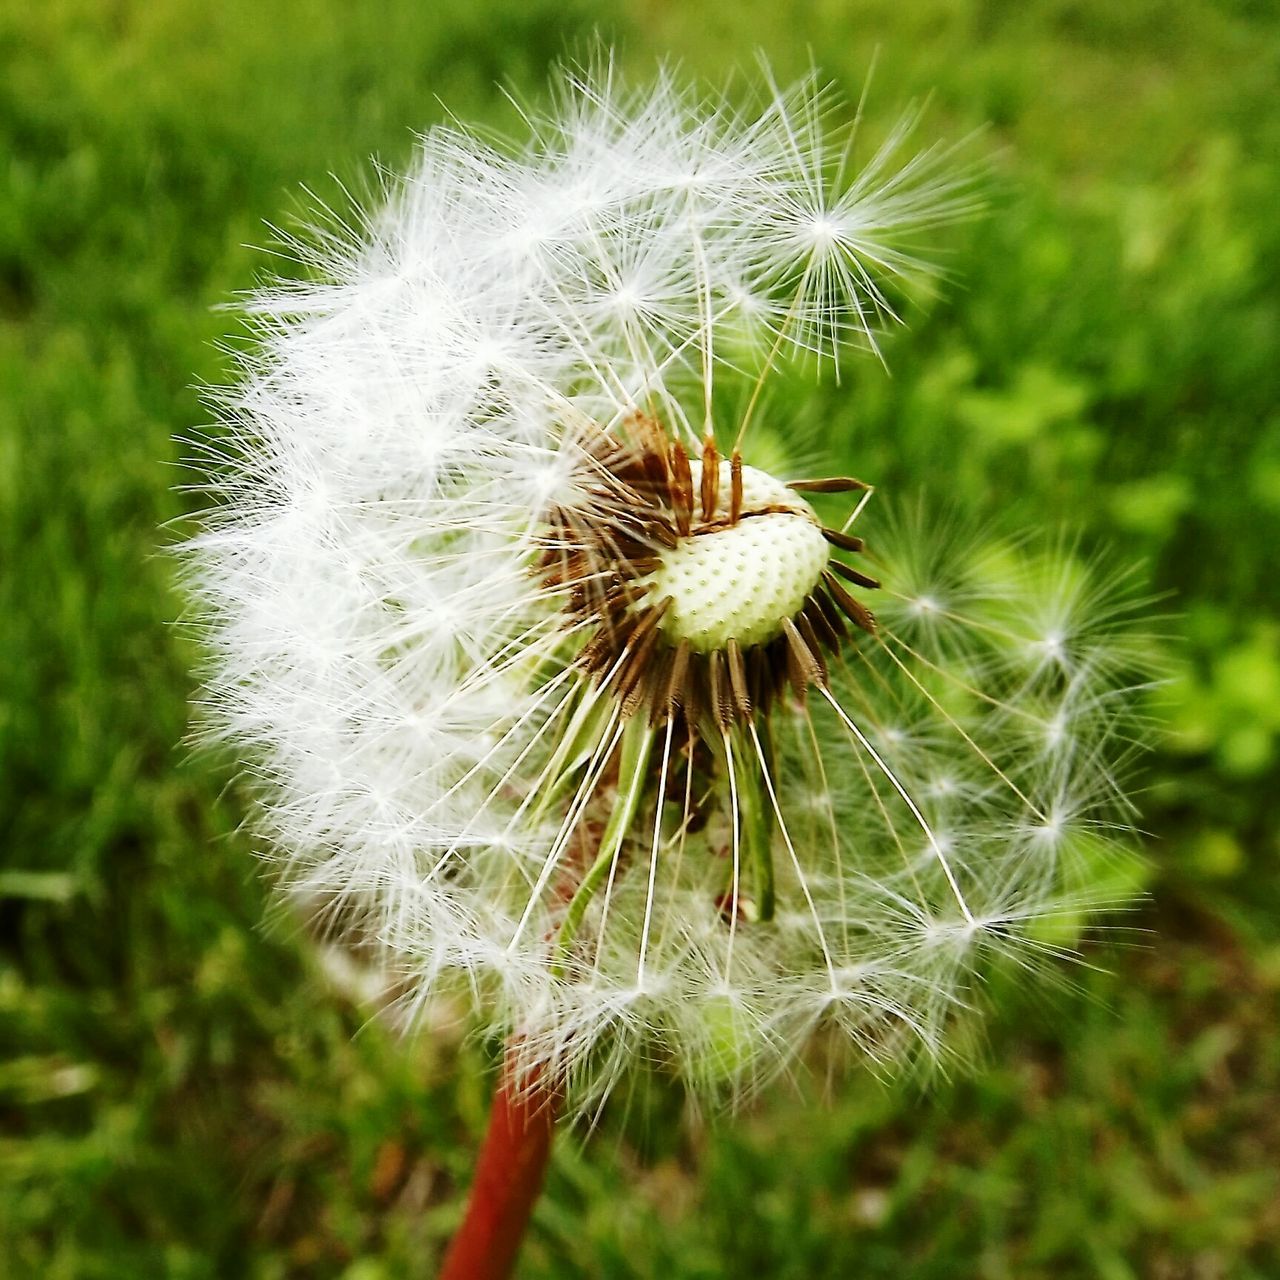 dandelion, flower, growth, fragility, freshness, flower head, close-up, focus on foreground, single flower, beauty in nature, nature, uncultivated, softness, dandelion seed, wildflower, plant, white color, stem, seed, day